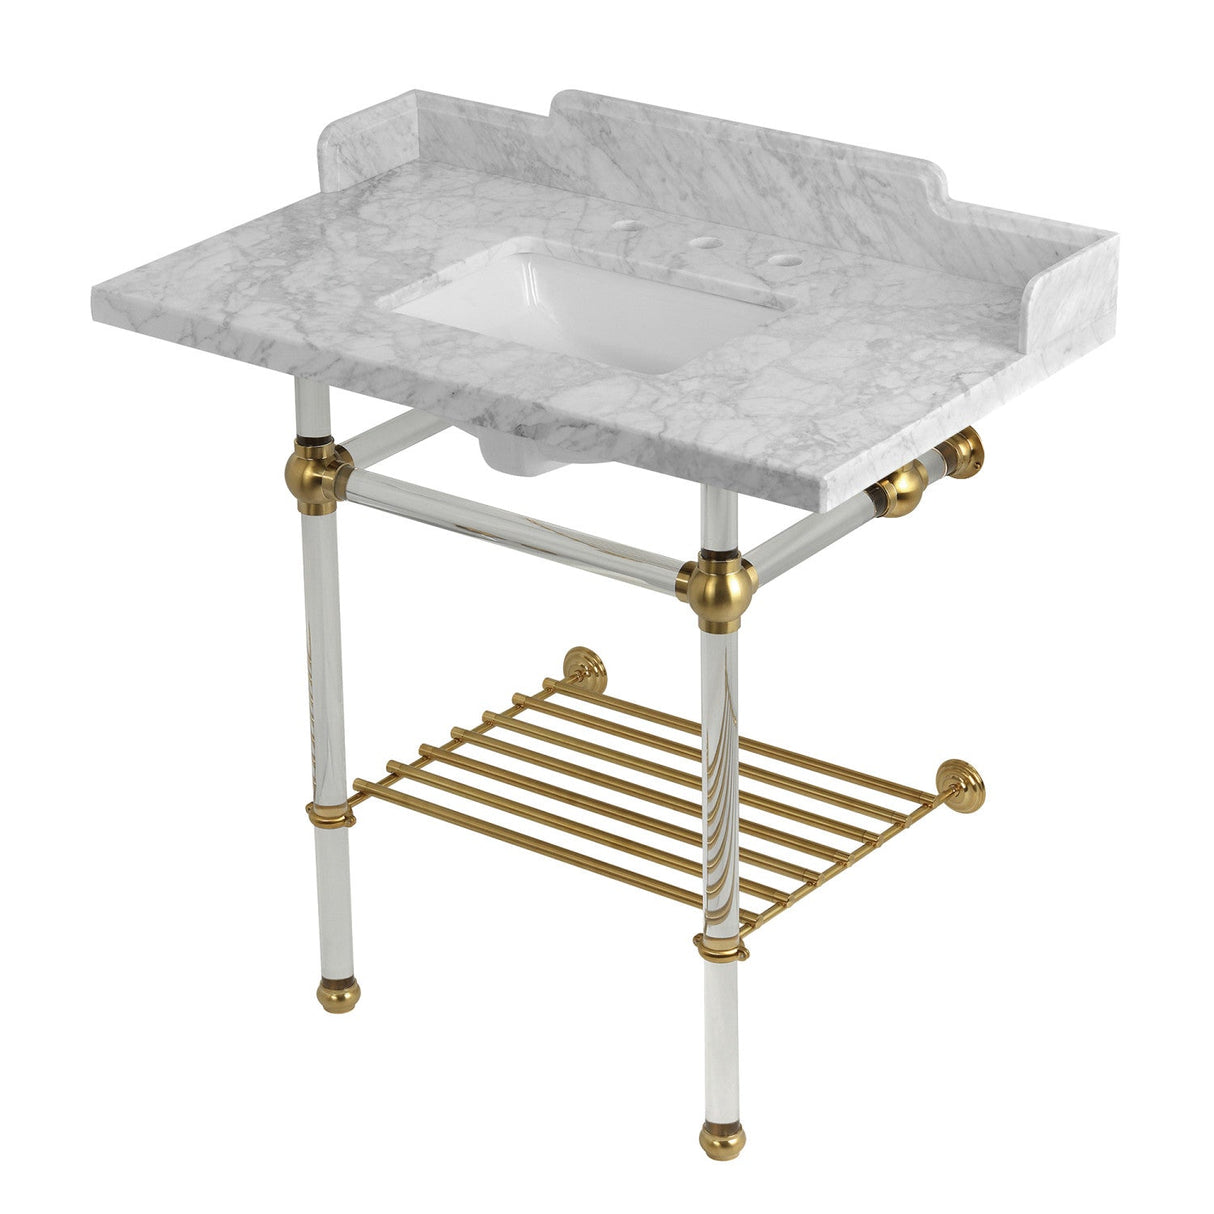 Pemberton LMS36MASQB7 36-Inch Console Sink with Acrylic Legs (8-Inch, 3 Hole), Marble White/Brushed Brass